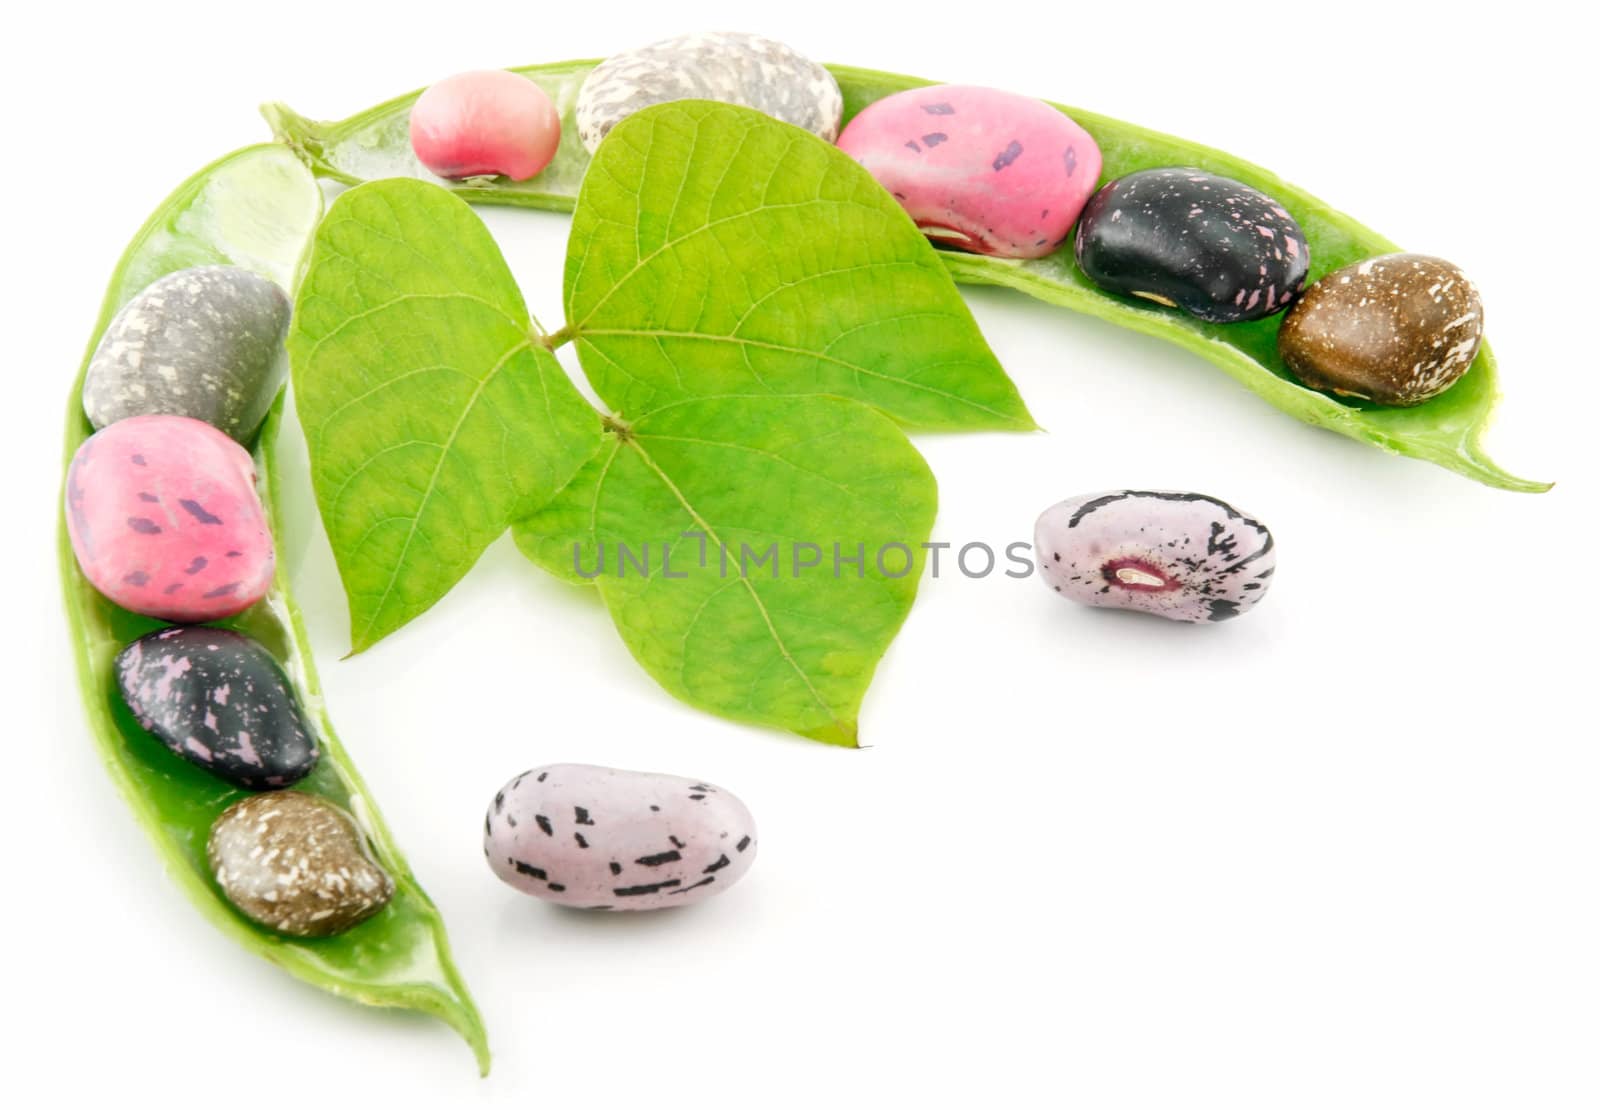 Ripe Haricot Beans with Seed and Leaves Isolated on White by alphacell